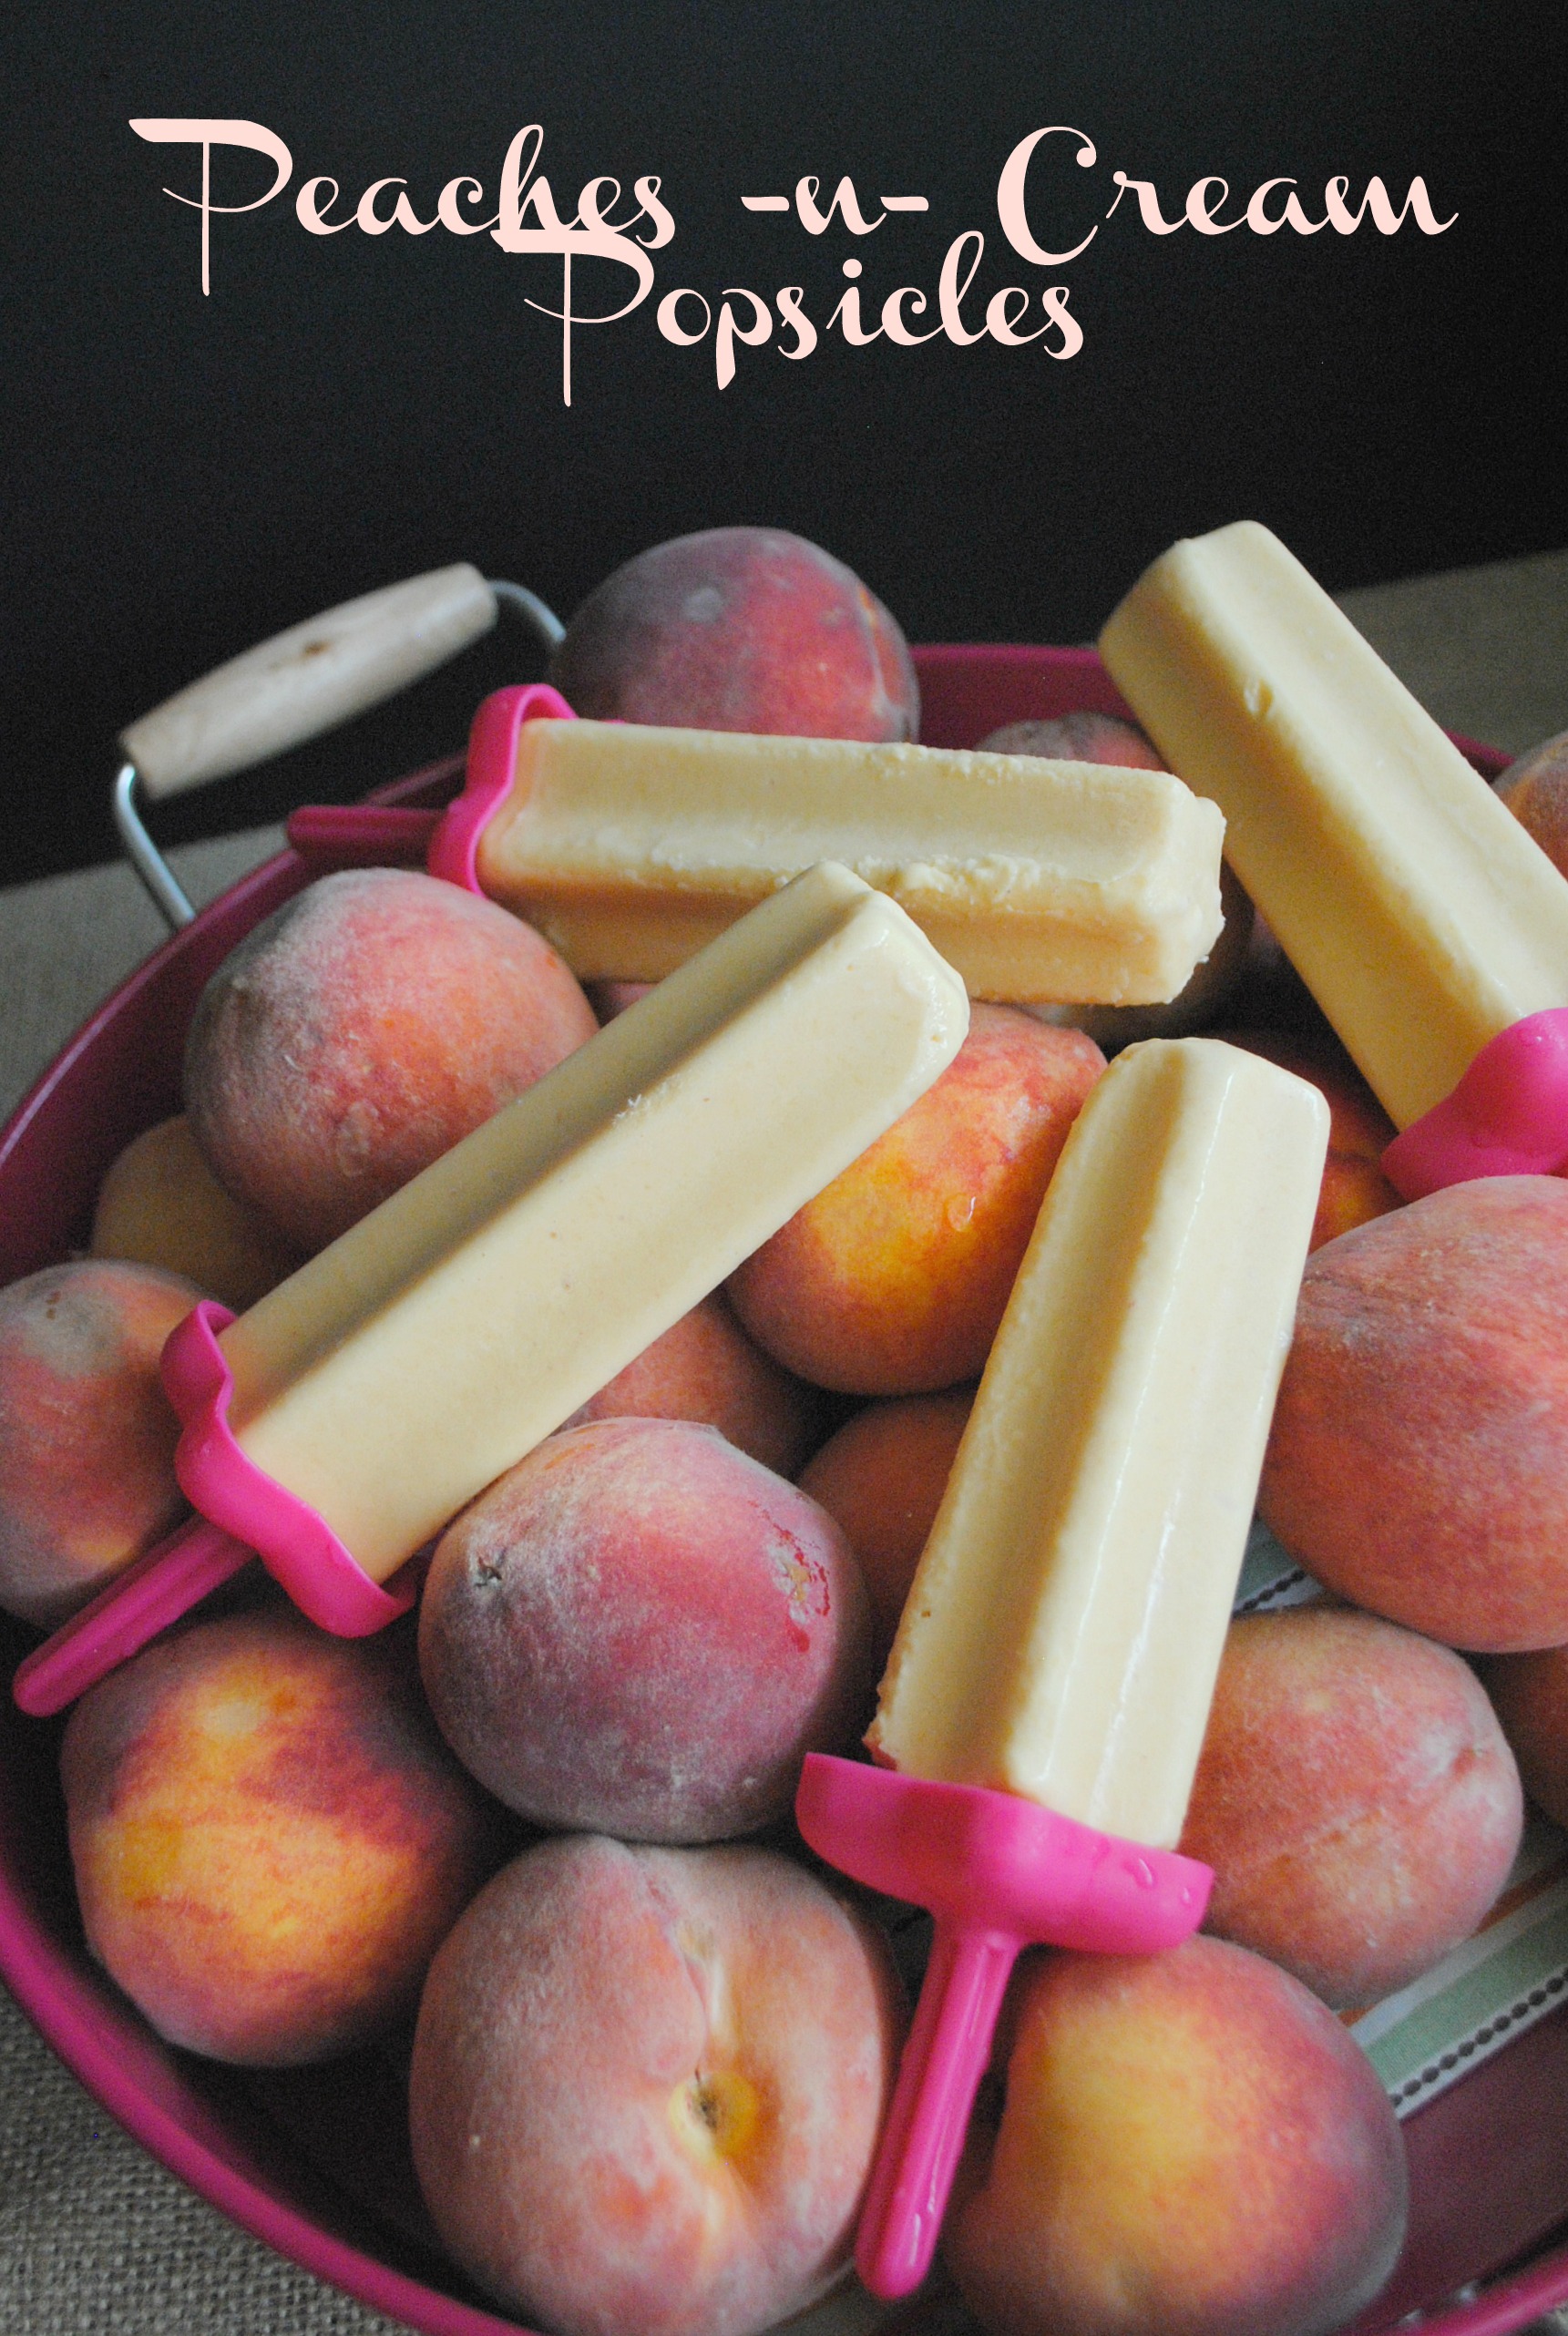 Peaches -n- Cream Popsicles |www.you-made-that.com